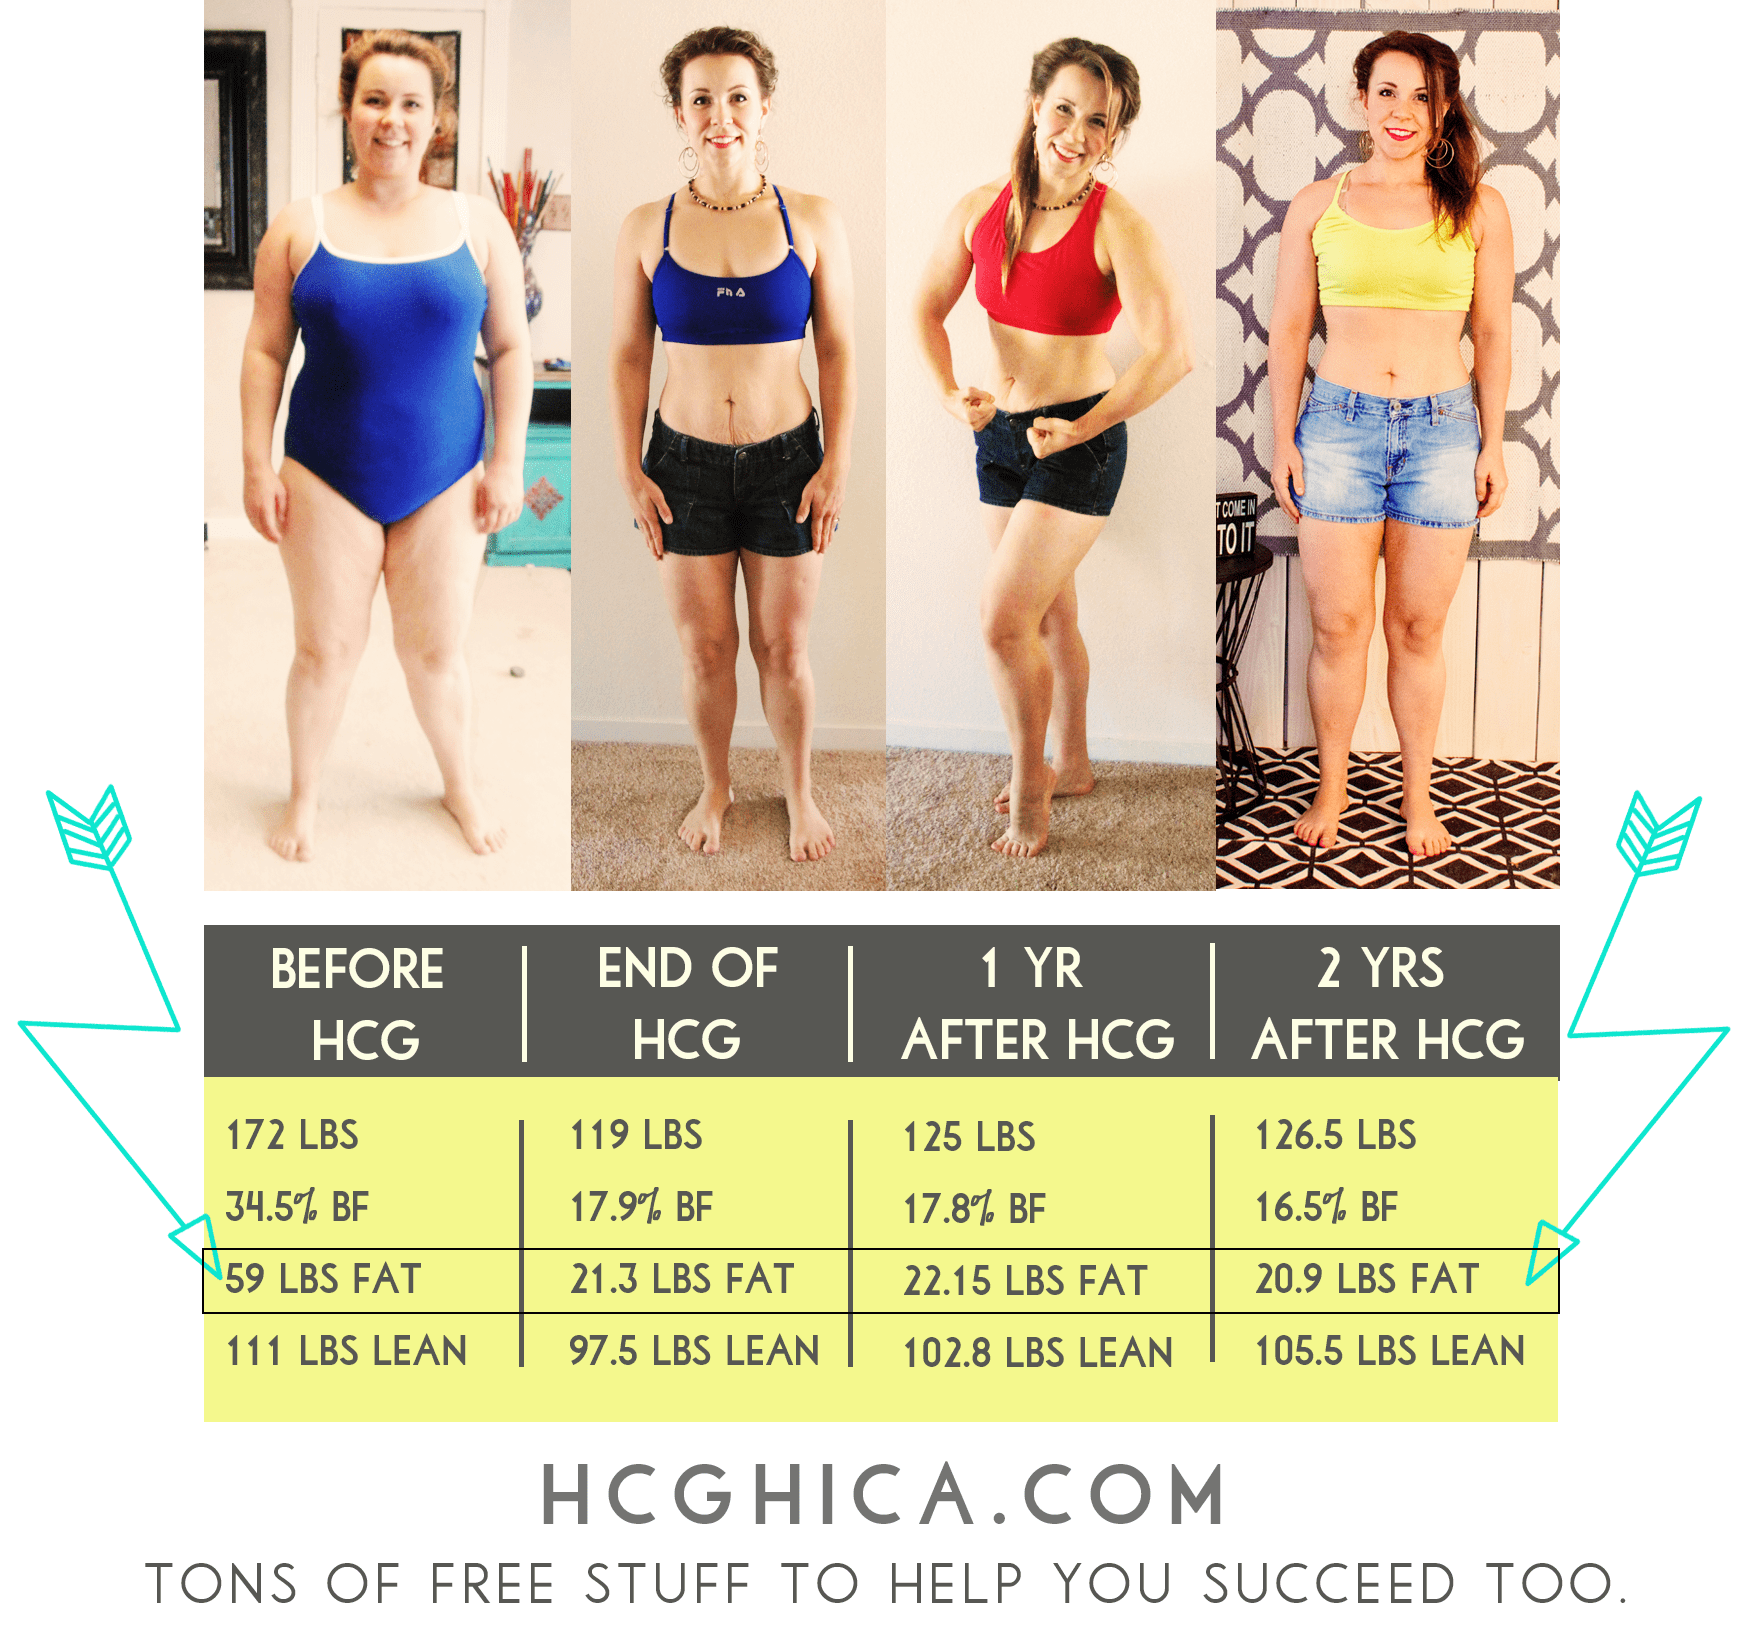 In-depth Information About the HCG Injections